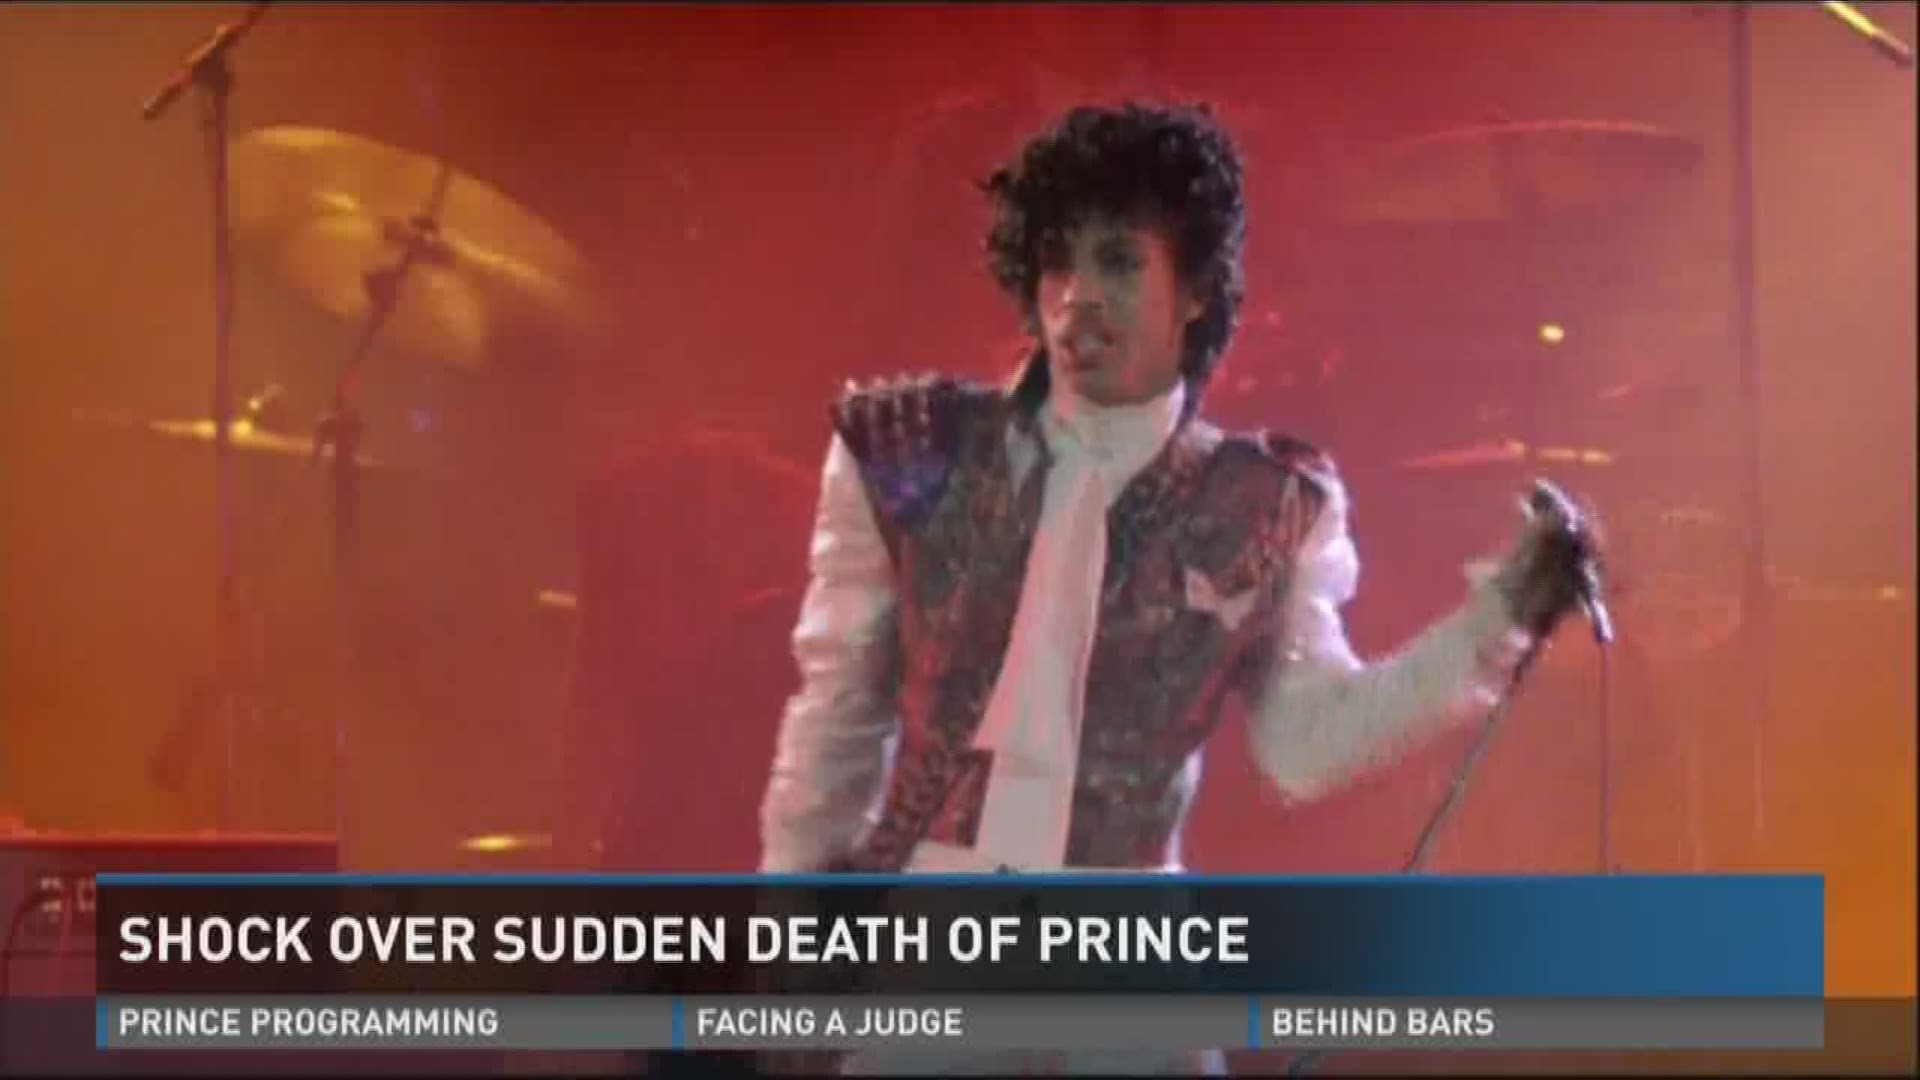 Shock over sudden death of Prince